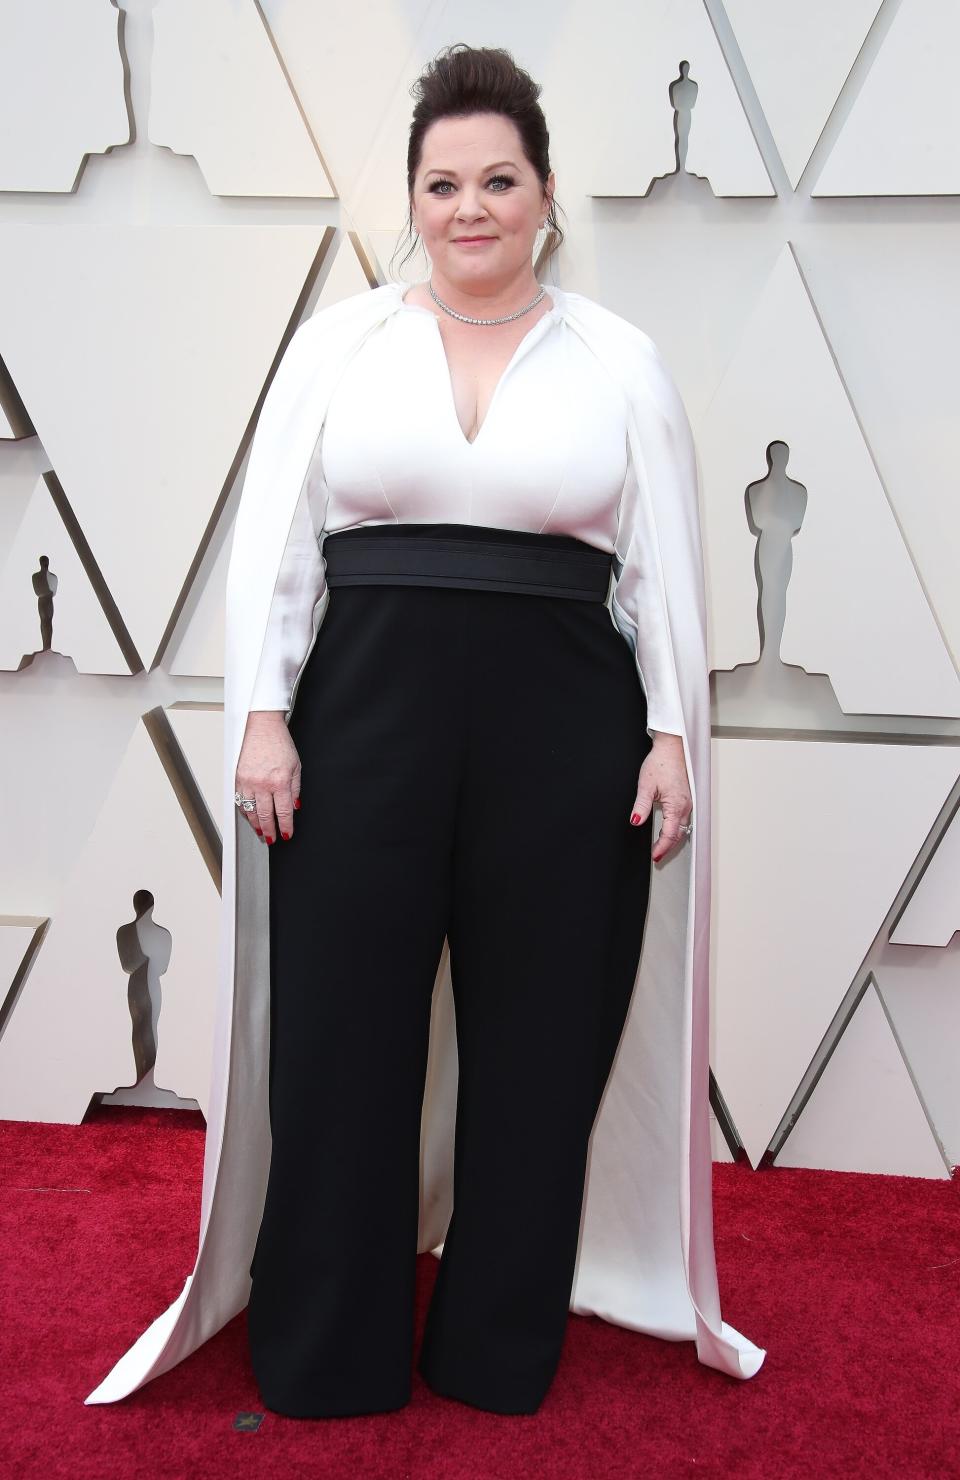 Melissa McCarthy arrives at the 91st Annual Academy Awards on Feb. 24, 2019, in Hollywood, California. (Photo: Dan MacMedan/Getty Images)